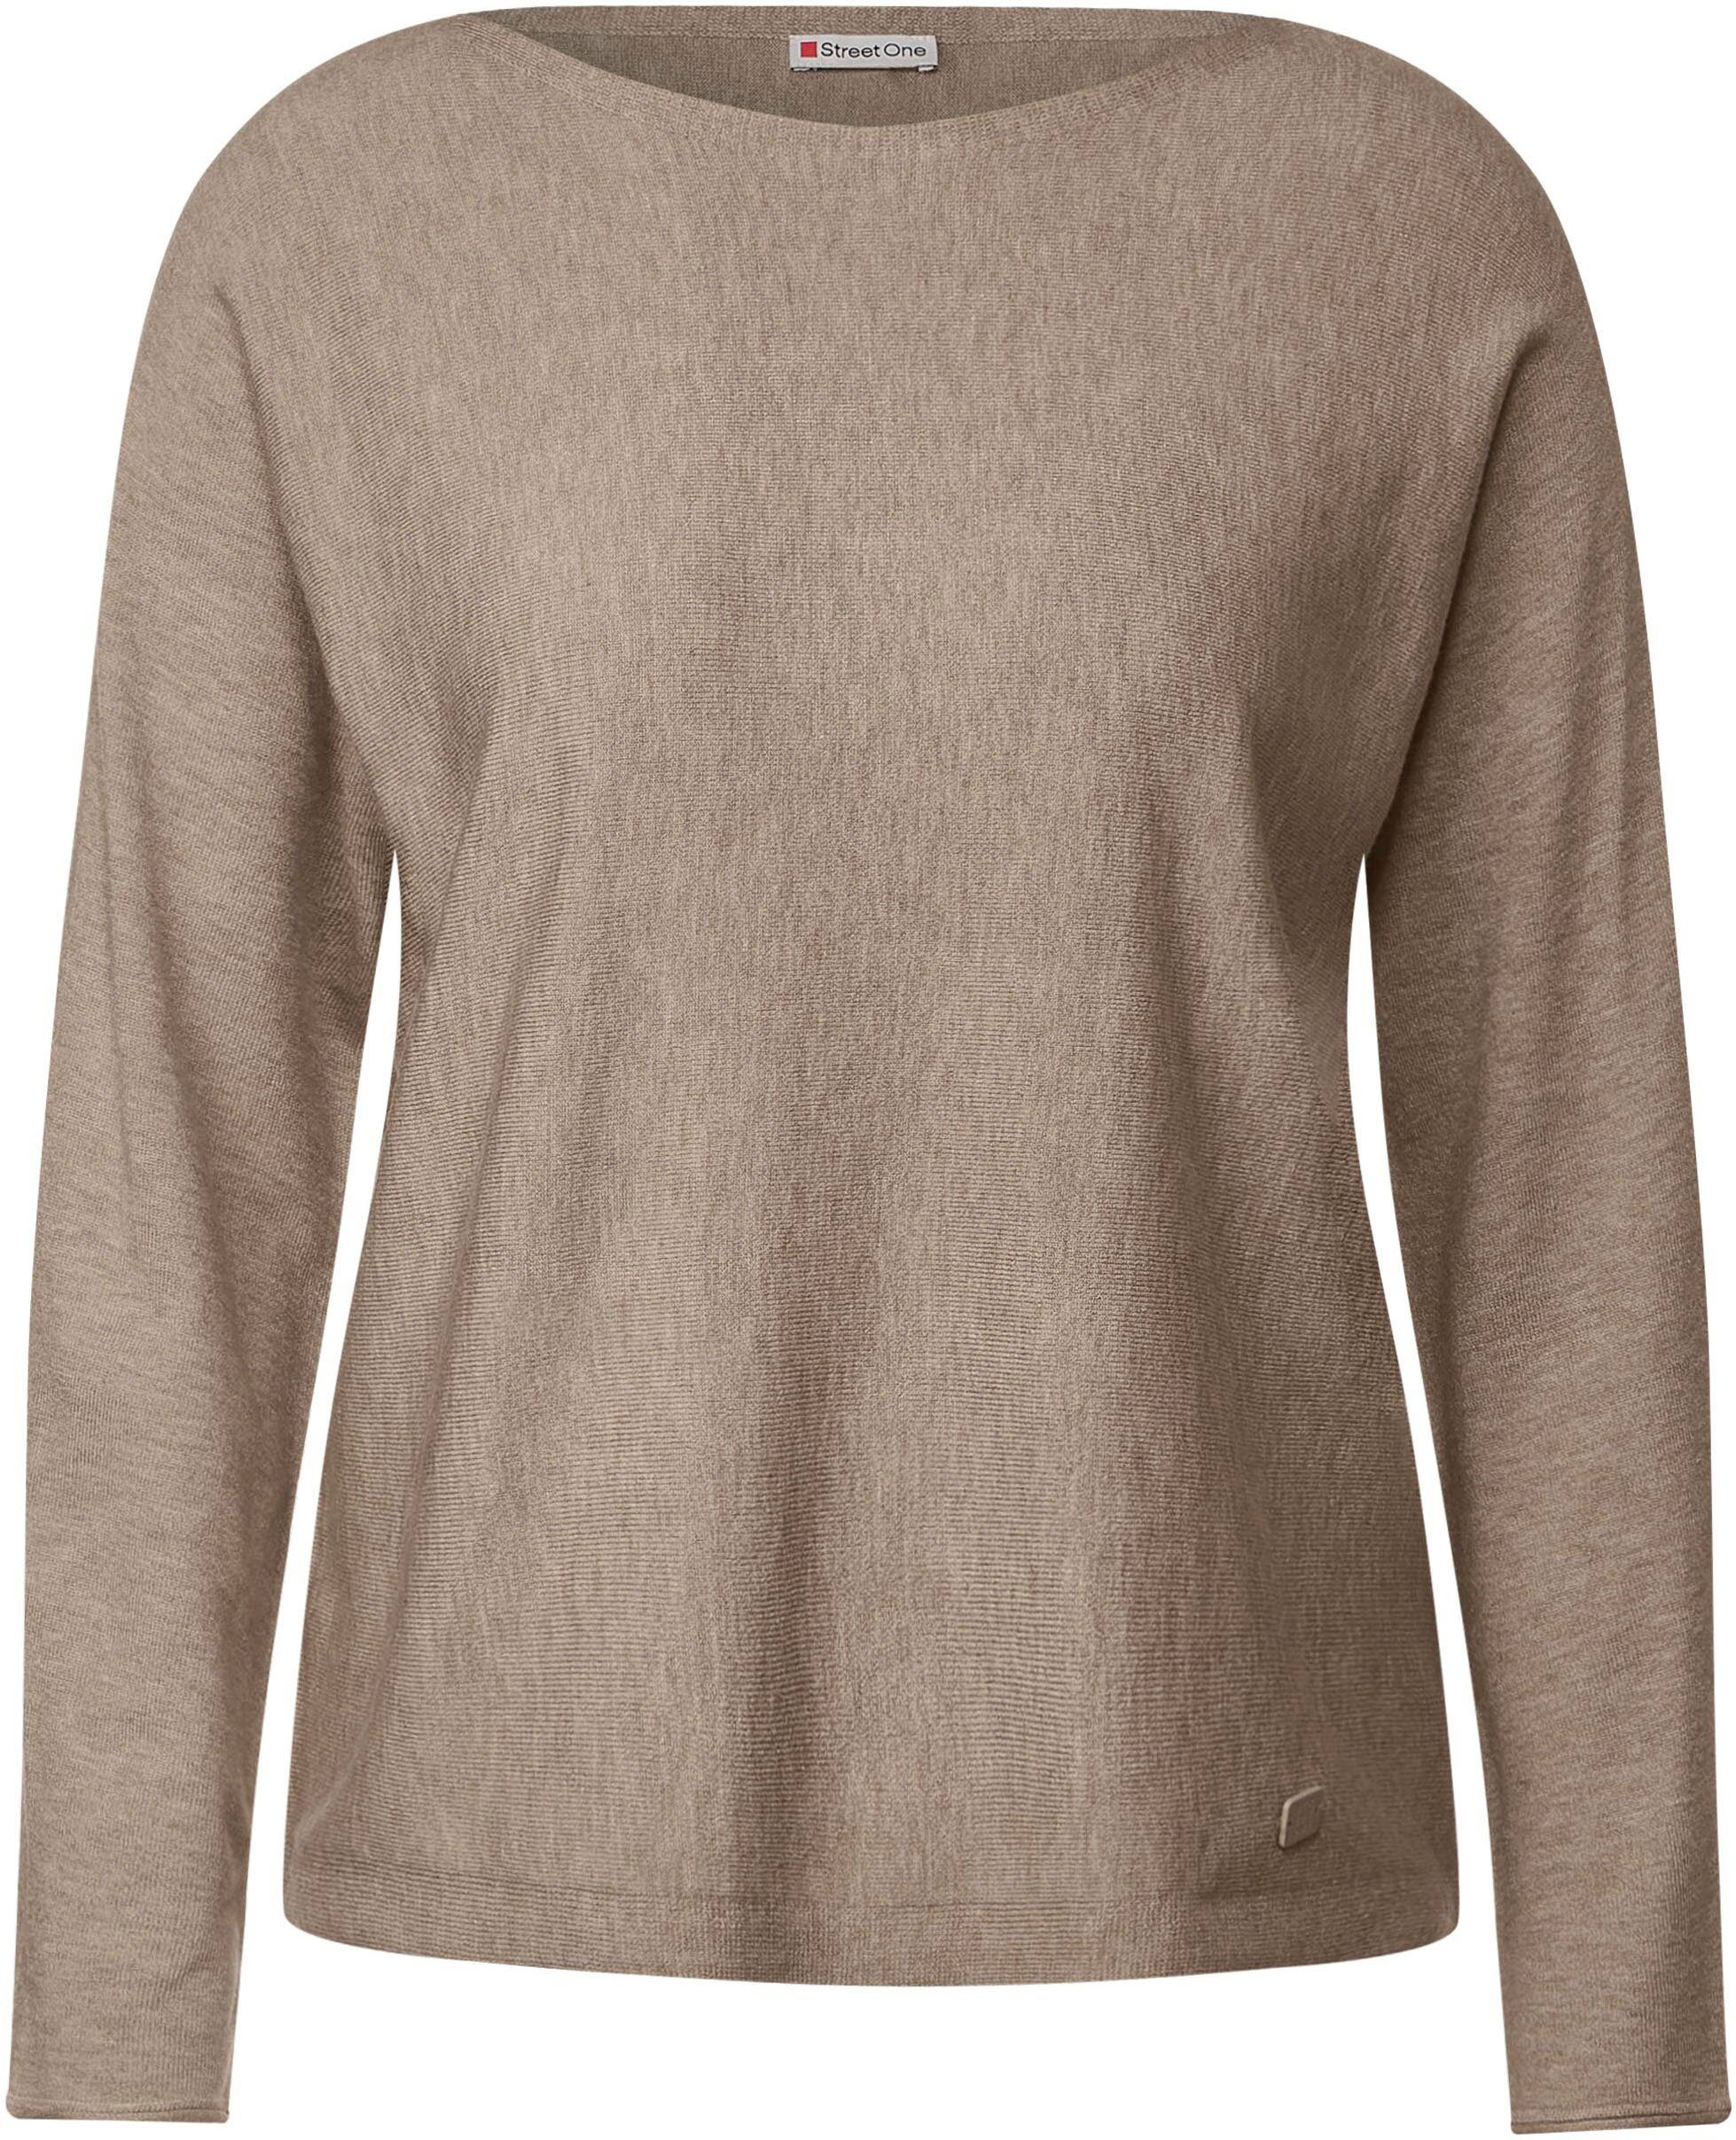 STREET ONE Strickpullover Unifarbe sand bleached in